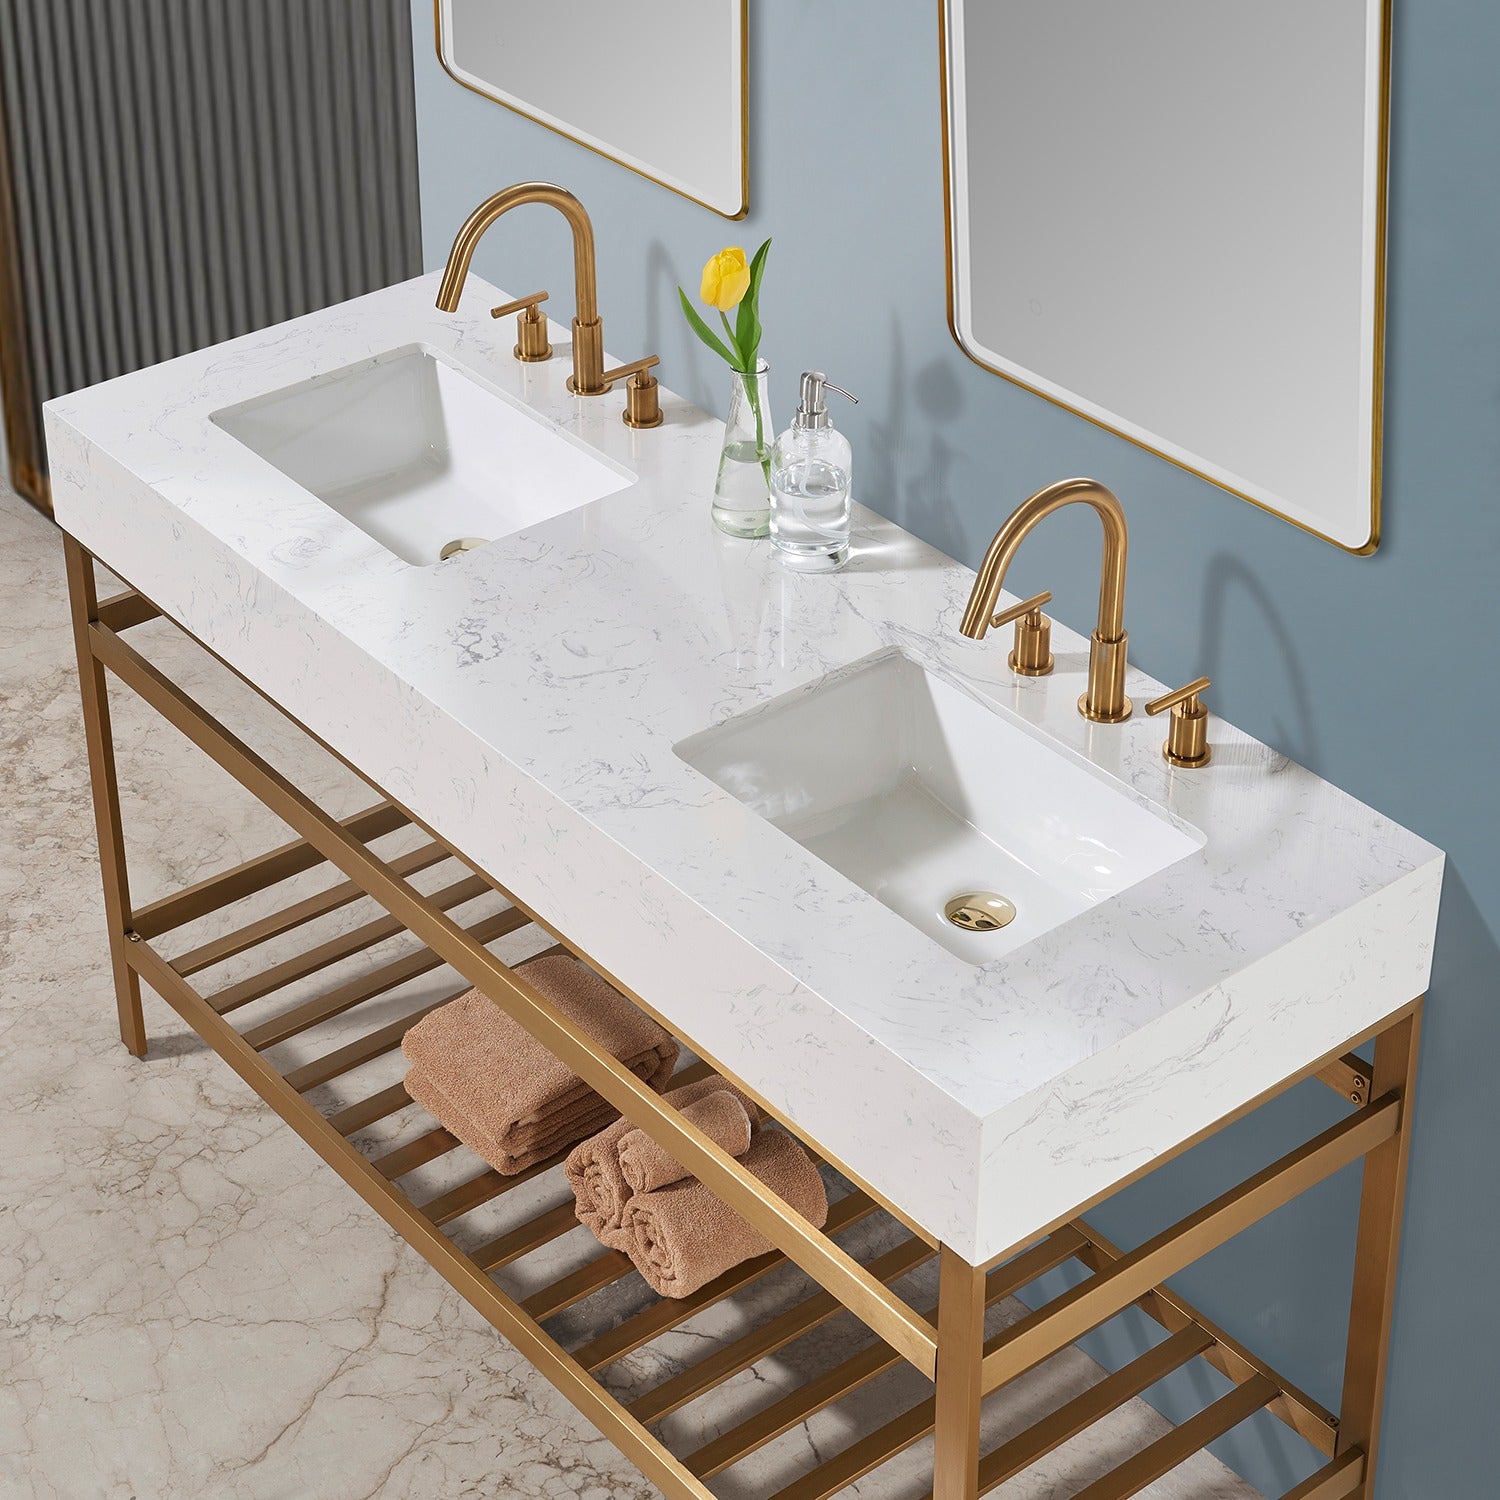 Merano 60" Double Stainless Steel Vanity Console with Aosta White Stone Countertop